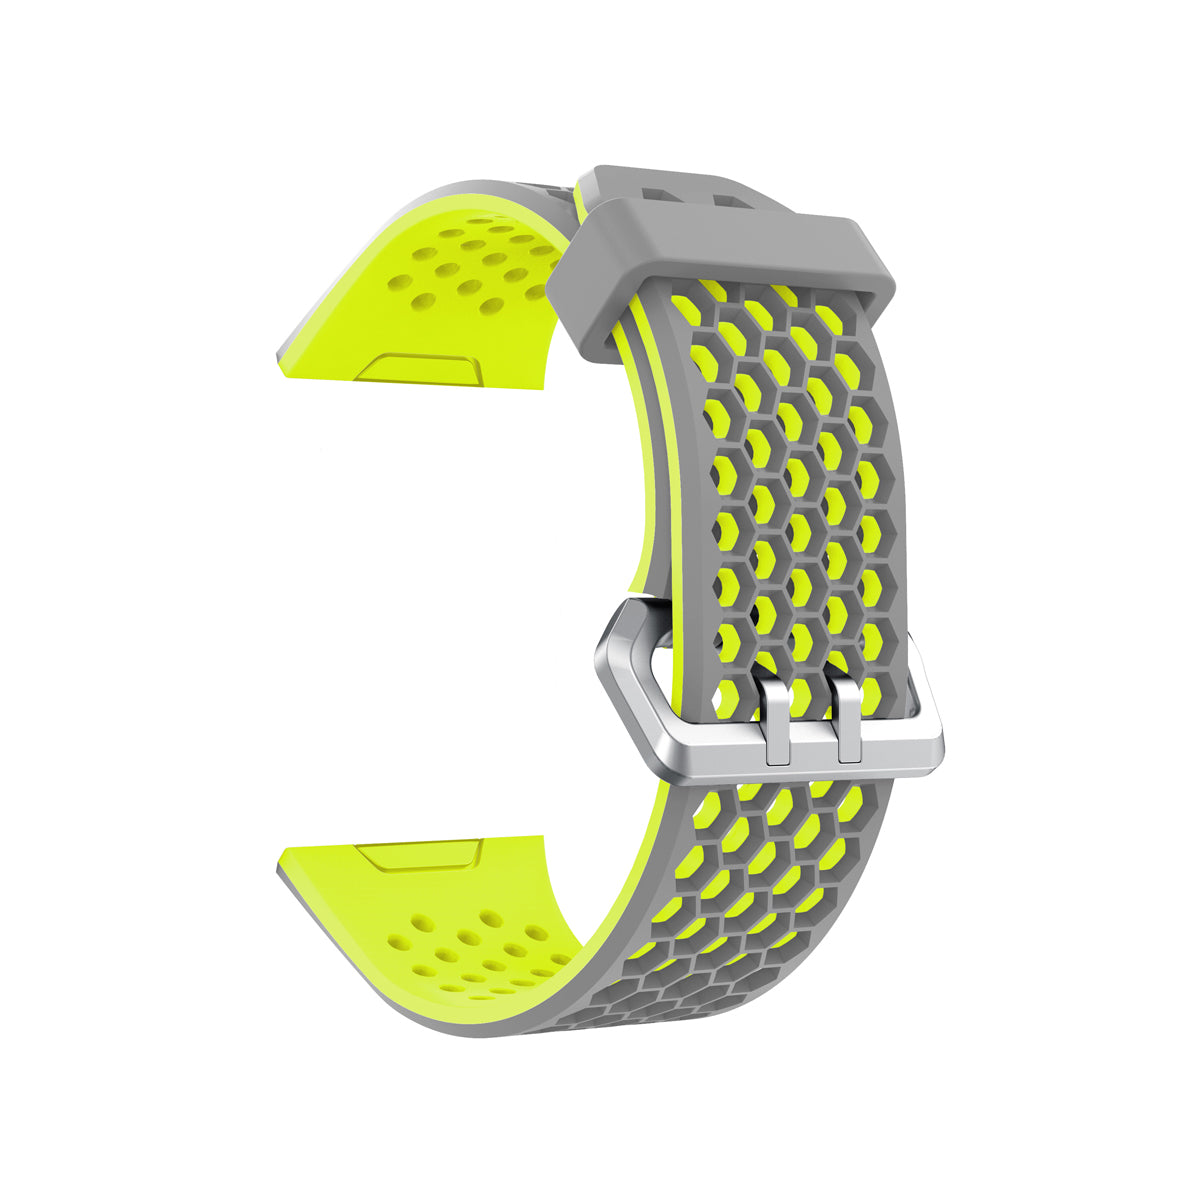 Airvent Fitbit Ionic Sports Band Replacement Strap Small Grey + Yellow Vents 